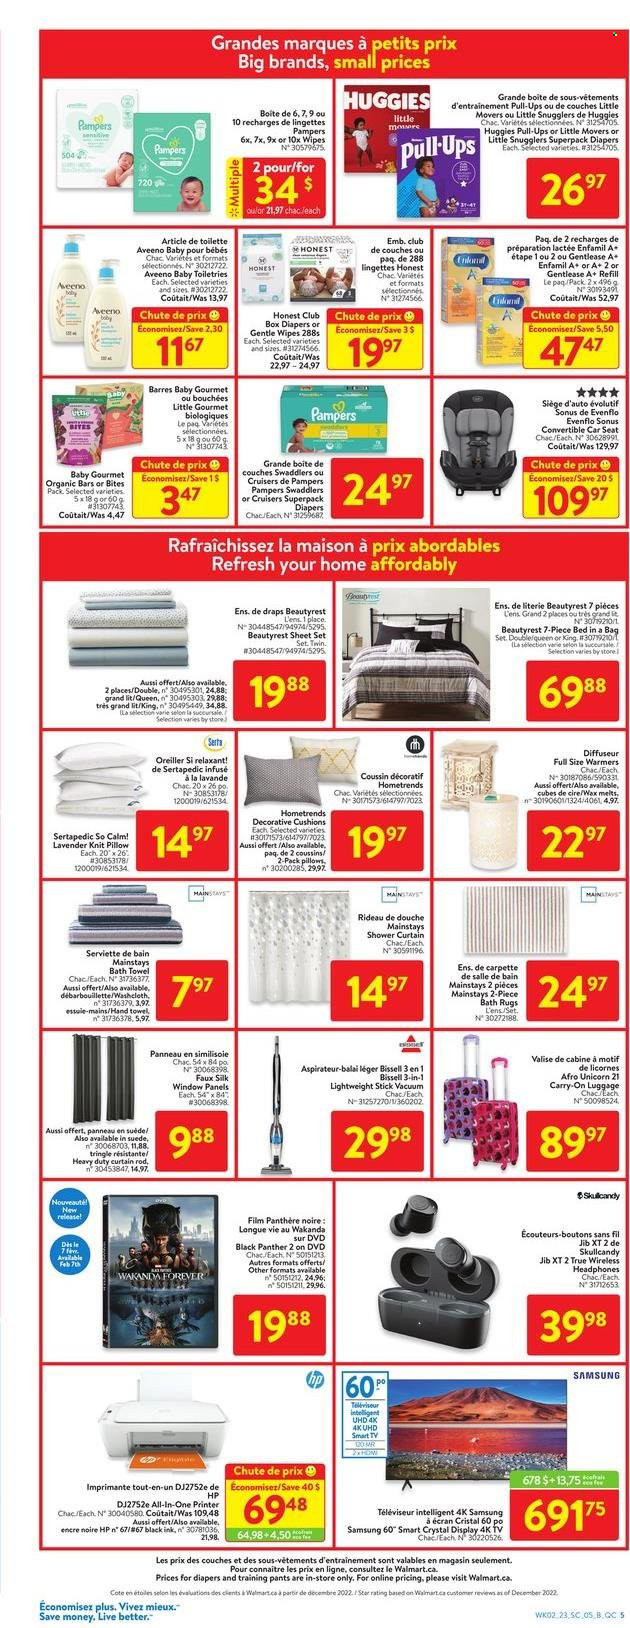 thumbnail - Walmart Flyer - February 02, 2023 - February 08, 2023 - Sales products - Hewlett Packard, Silk, Enfamil, wipes, Pampers, pants, nappies, baby pants, Aveeno, shower curtain, DVD, cushion, pillow, curtain, bath mat, bath towel, towel, washcloth, hand towel, Samsung, UHD TV, TV, Skullcandy, wireless headphones, headphones, Bissell, all-in-one printer, printer, bed, luggage, baby car seat, smart tv, Huggies, curtain rod. Page 8.